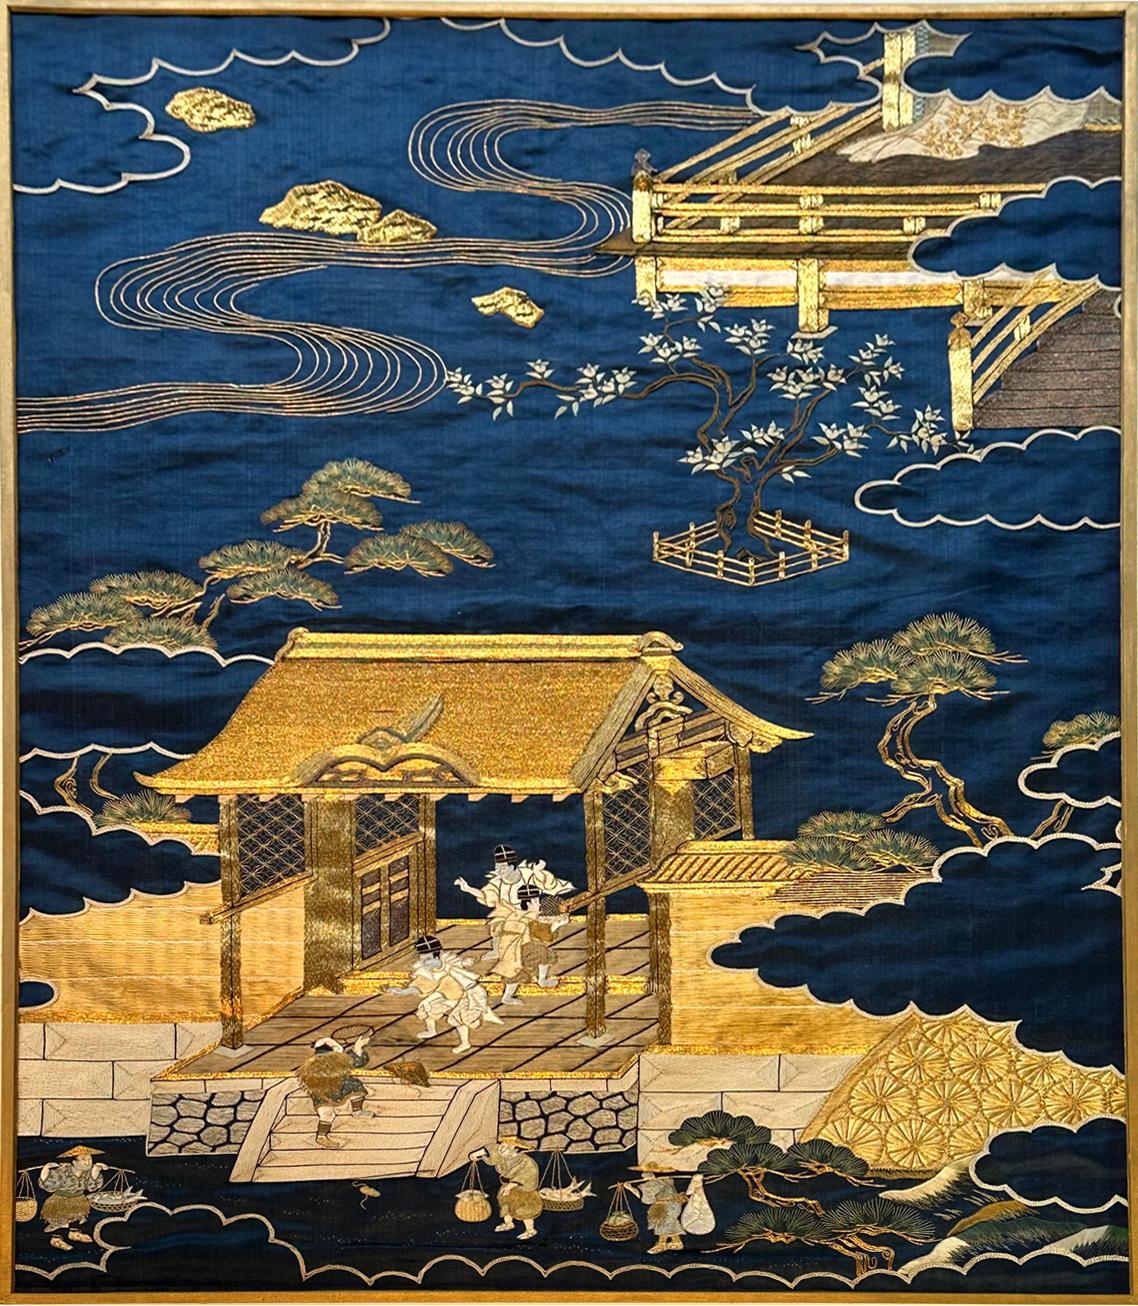 Framed Antique Japanese Embroidery Fukusa Textile Panel For Sale 14